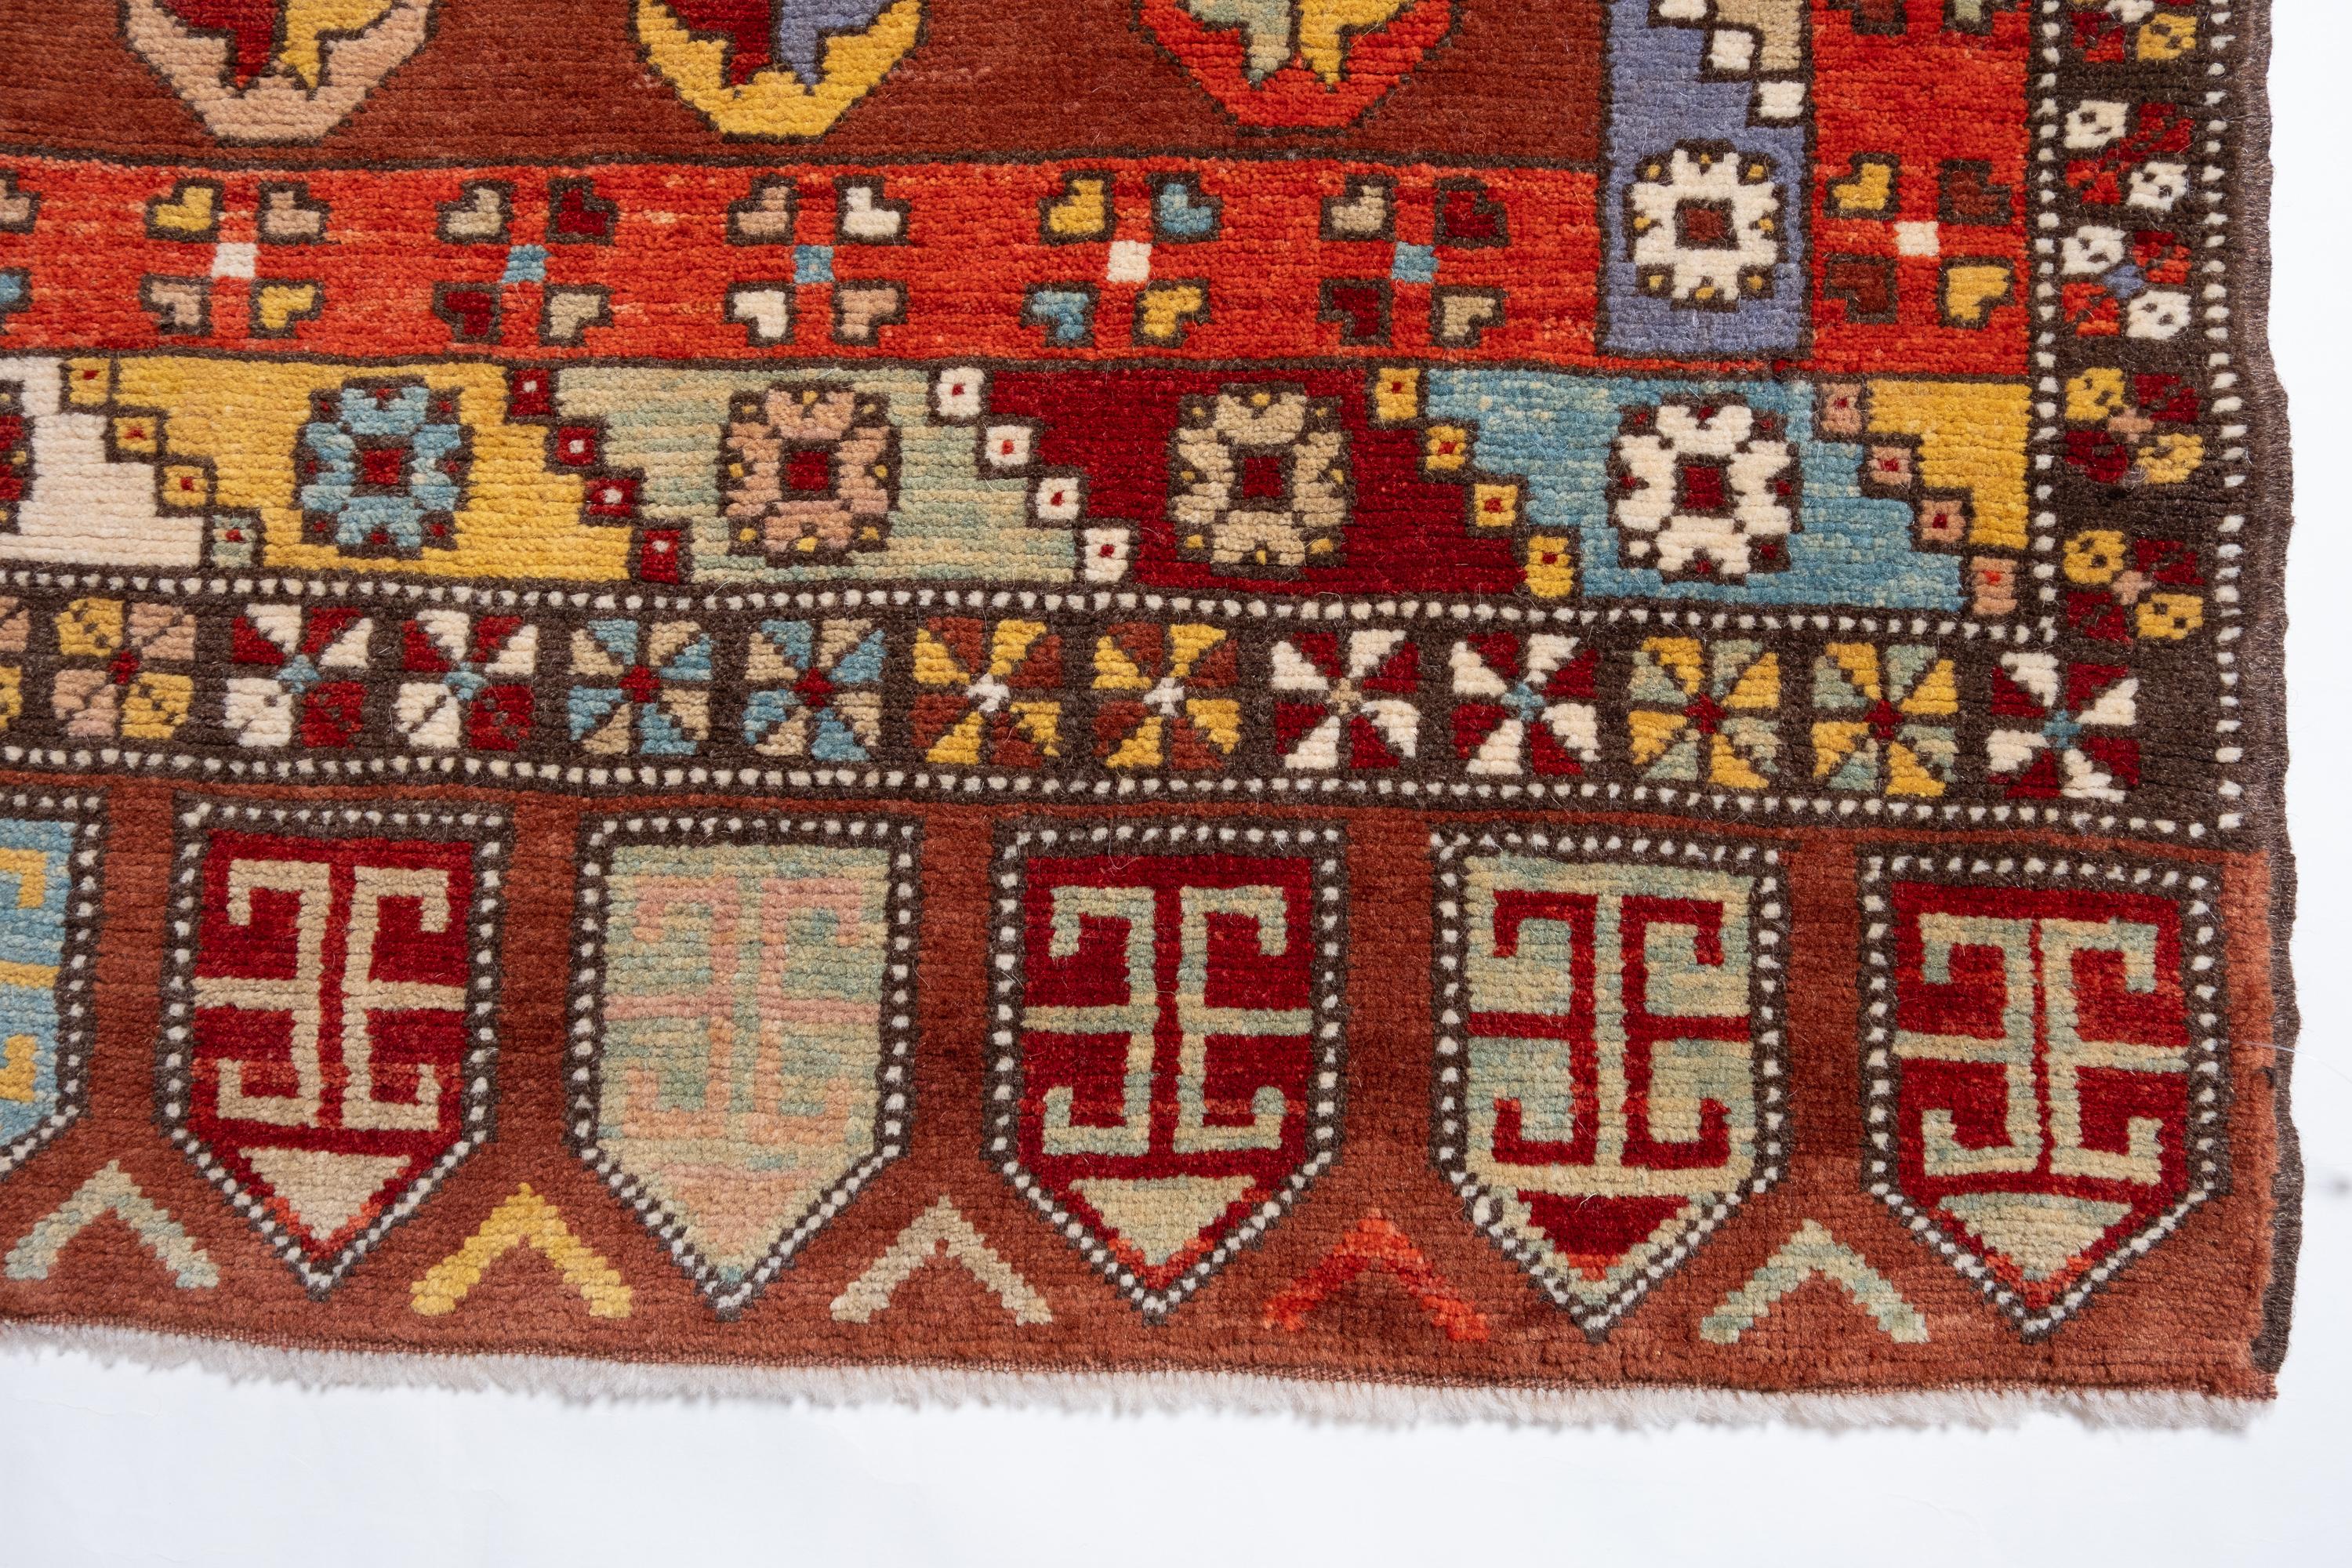 This is a dual medallion as the main element of the design of 18th-century carpet from the Konya region, Central Anatolia area of Turkey. Rugs of this type, using two medallions, appear frequently in 15th-century paintings of both the Venetian and